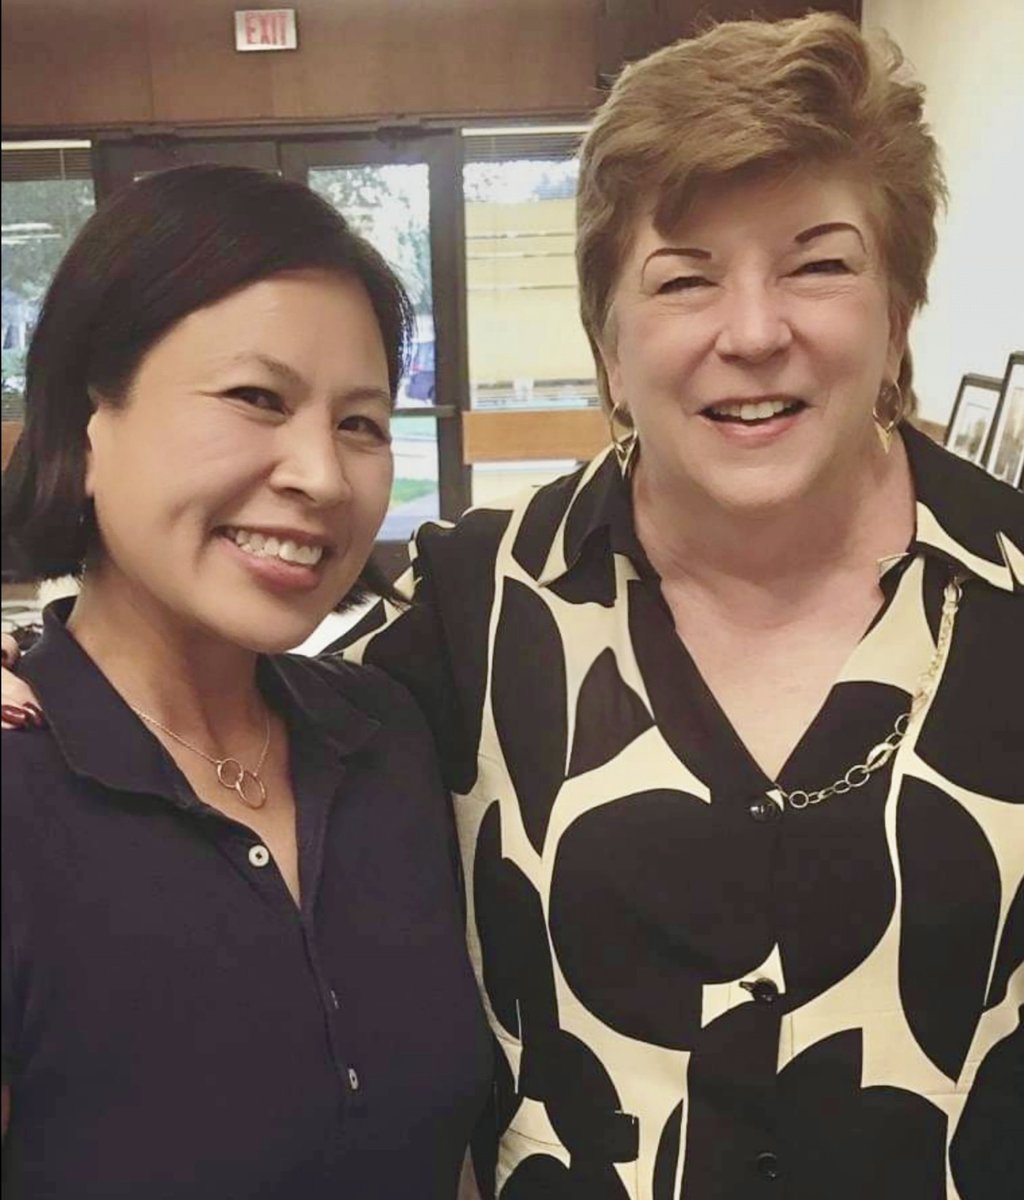 We are heartbroken to hear of the passing of former State SPI & early childhood champion, Delaine Eastin. Her commitment to fighting for children & families never wavered & continues to be the guiding light for our north star. She made all of us better & we will miss her greatly.